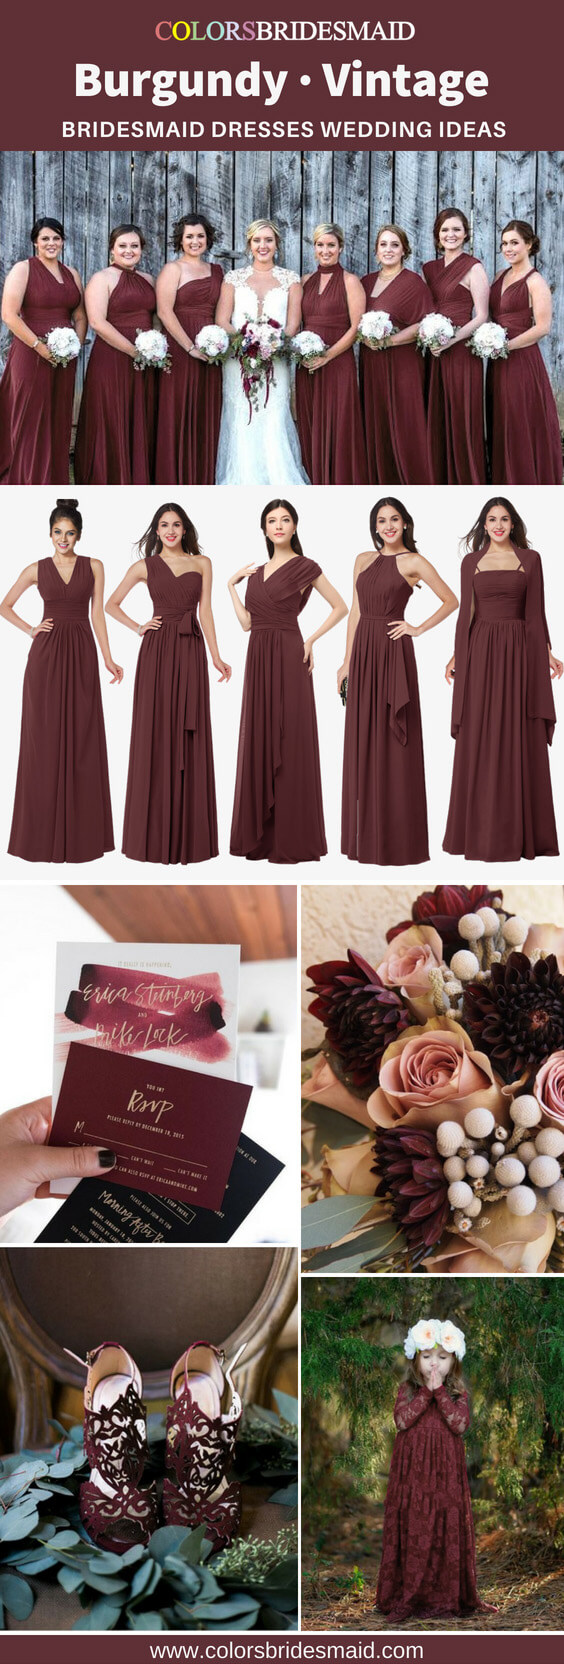 Burgundy Vintage Bridesmaid Dresses That You Will Swoon For ...